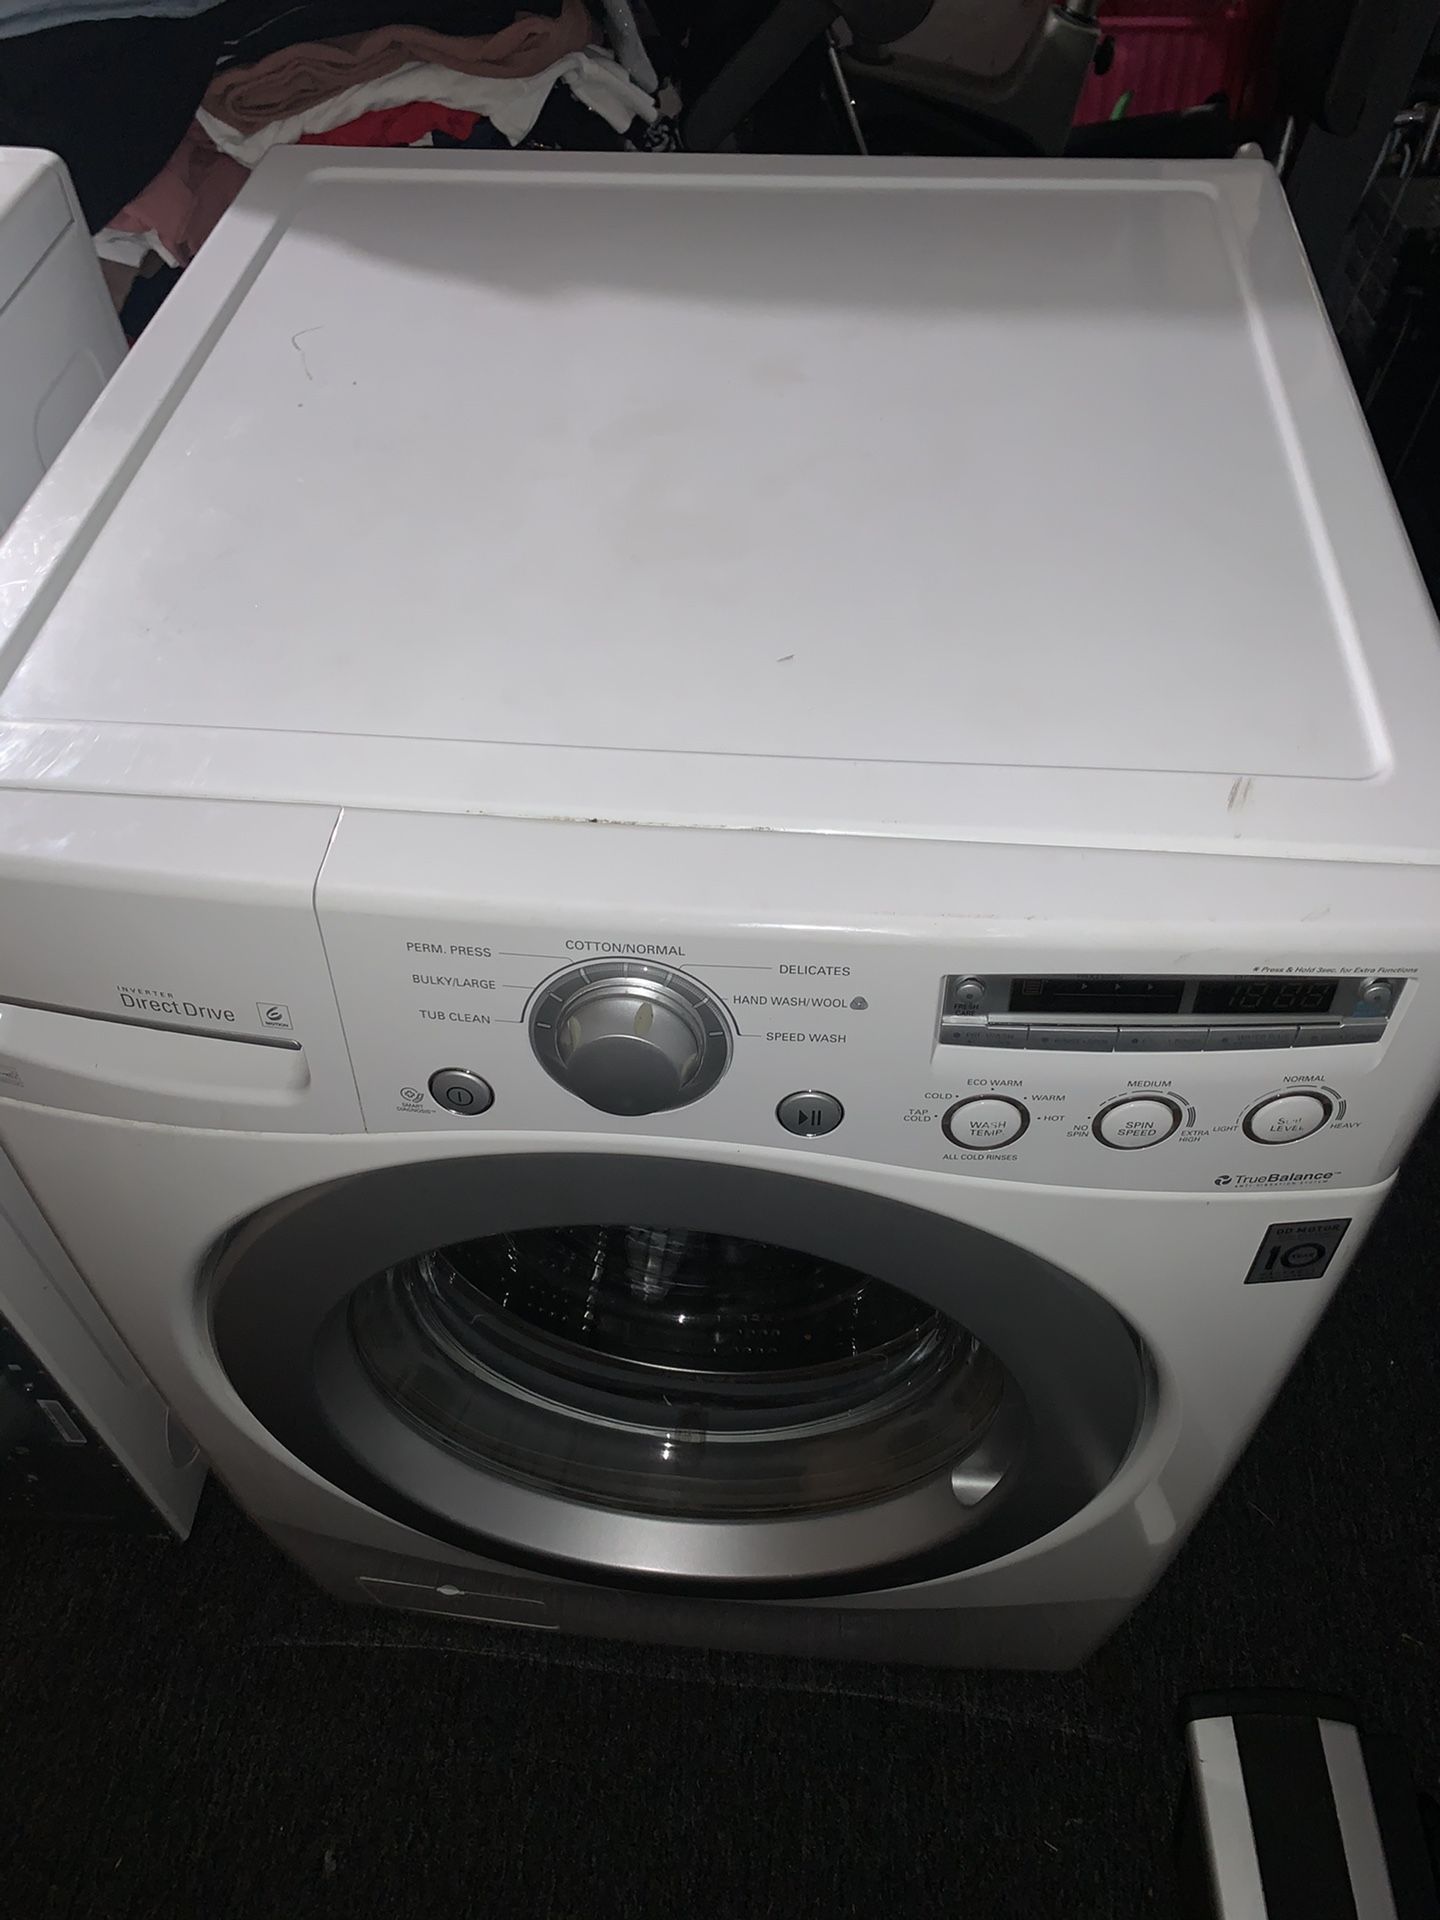 LG dryer and washers...